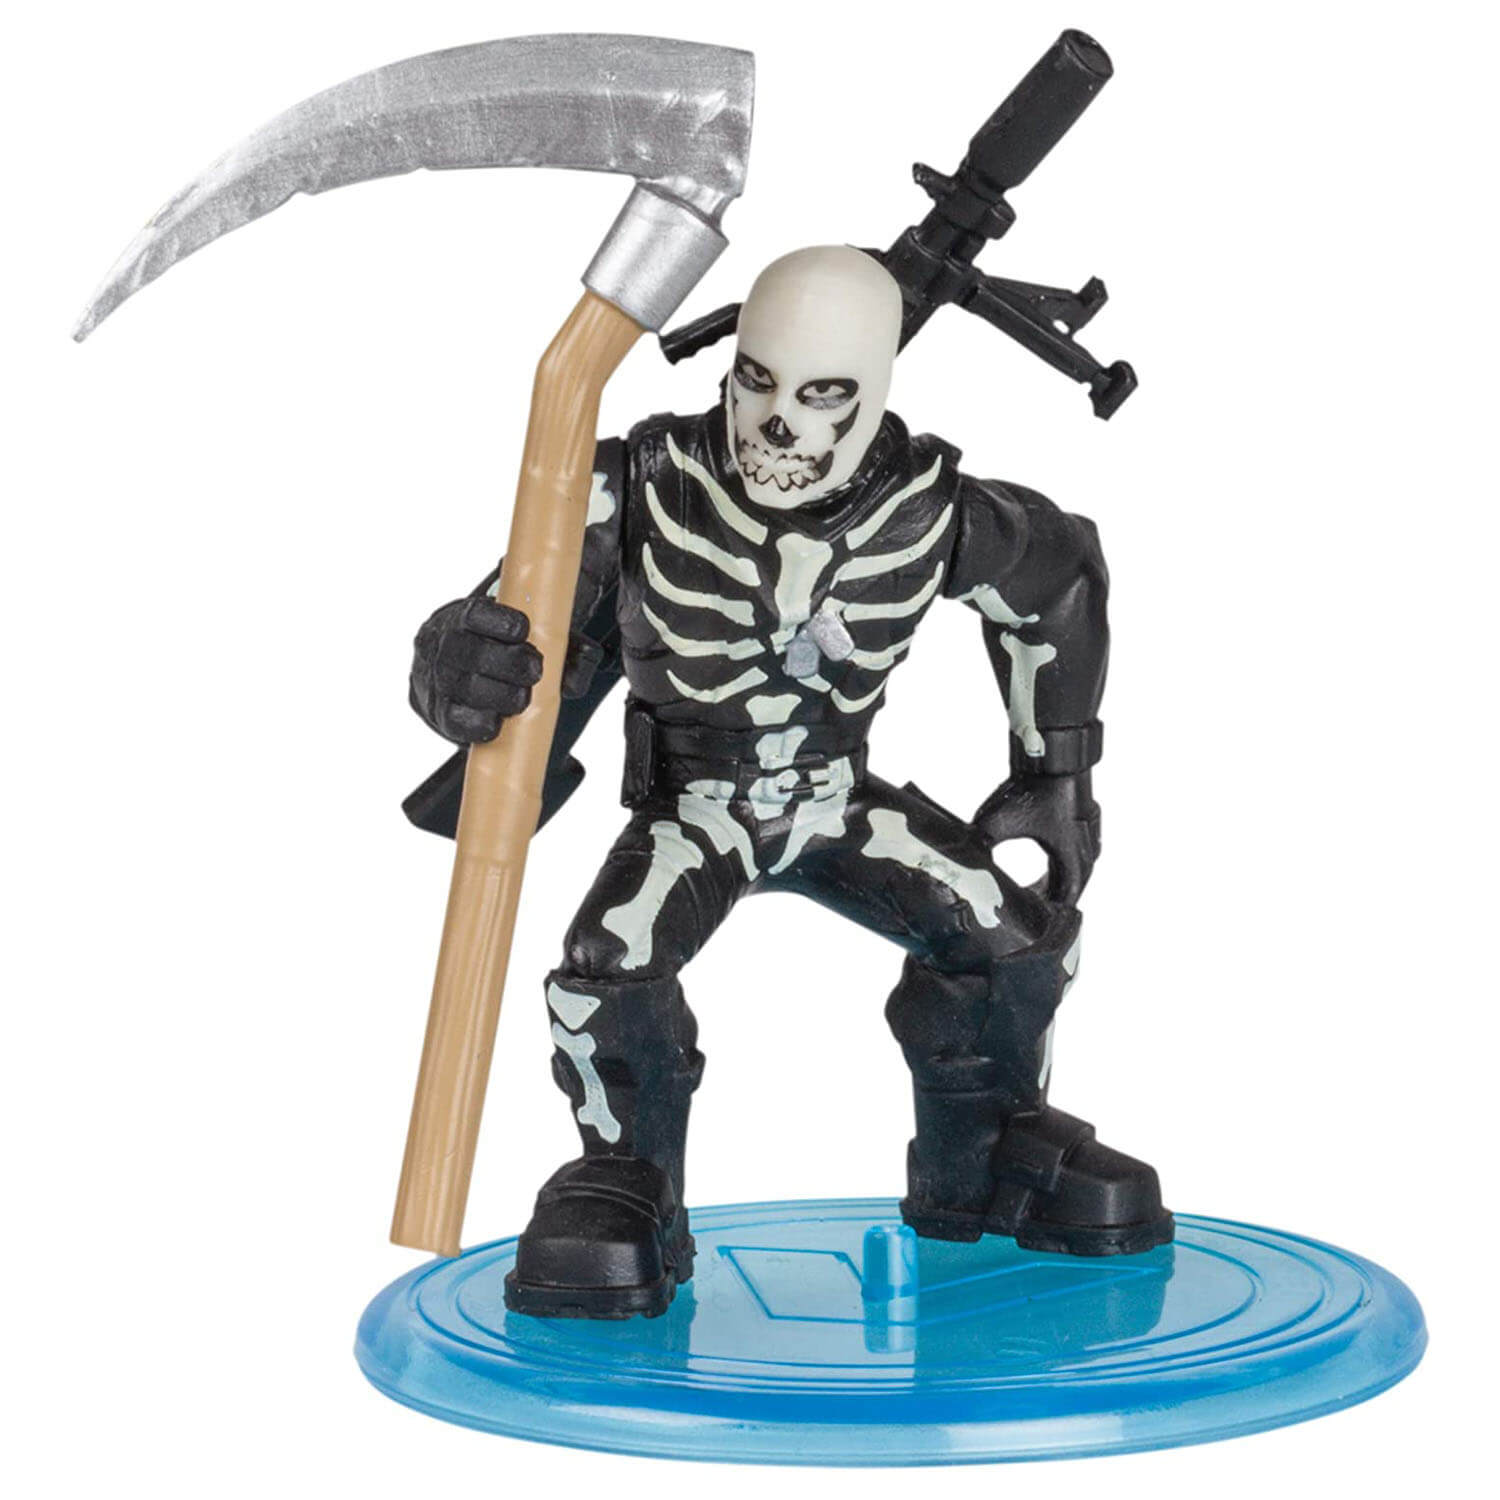 Front view of the fortnite figure.